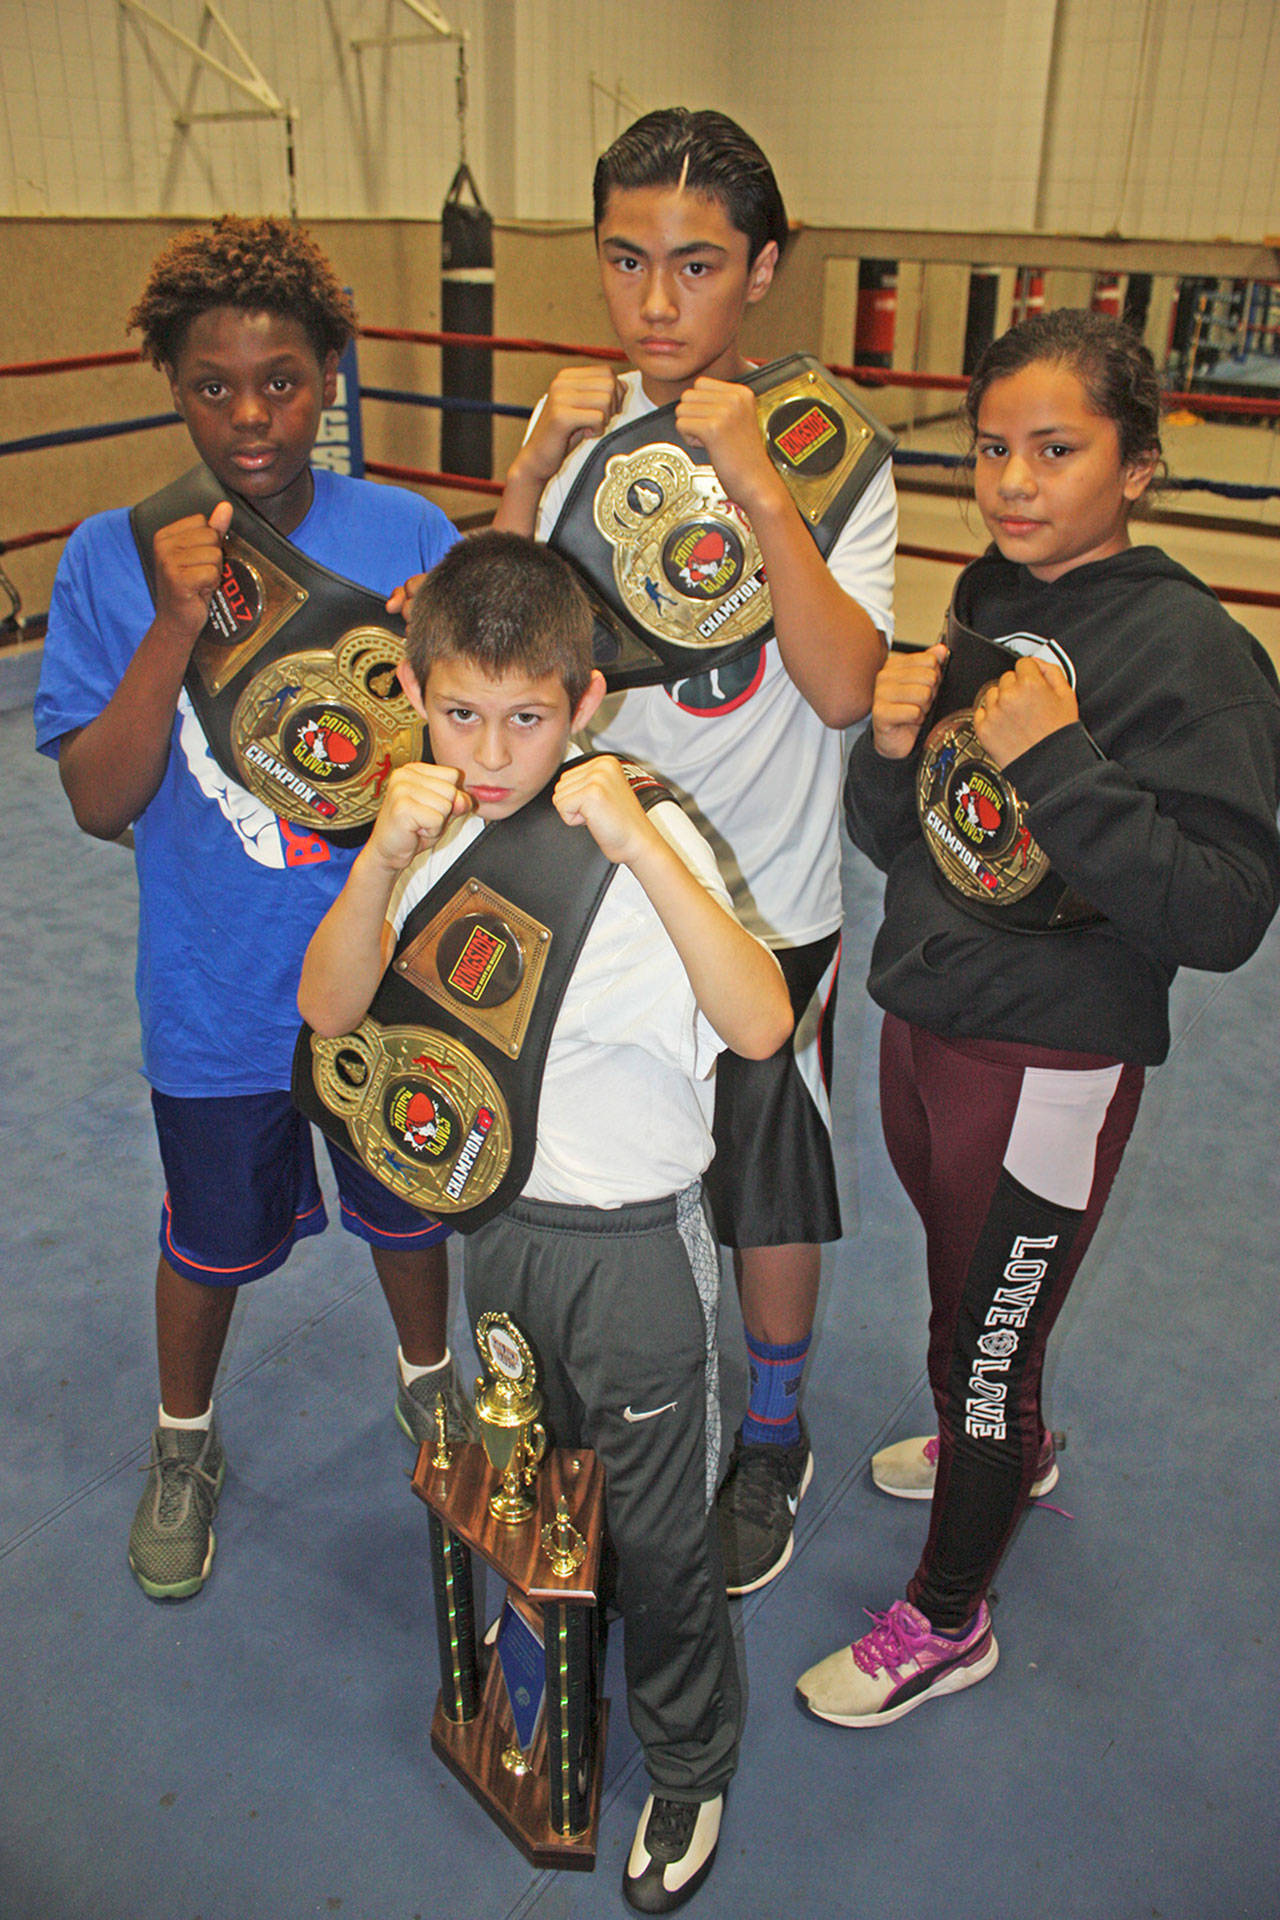 Nathan Kim, middle, was one of four Tacoma Boxing Club national champions for the Tacoma Boxing Club. Others included, from left, 12-year-old Malachi Jenkins (125 pounds), 9-year-old Joseph Nieto (65 pounds, most outstanding boxer in his division) and 10-year-old America Hernandez (125 pounds, female division). MARK KLAAS, Kent Reporter